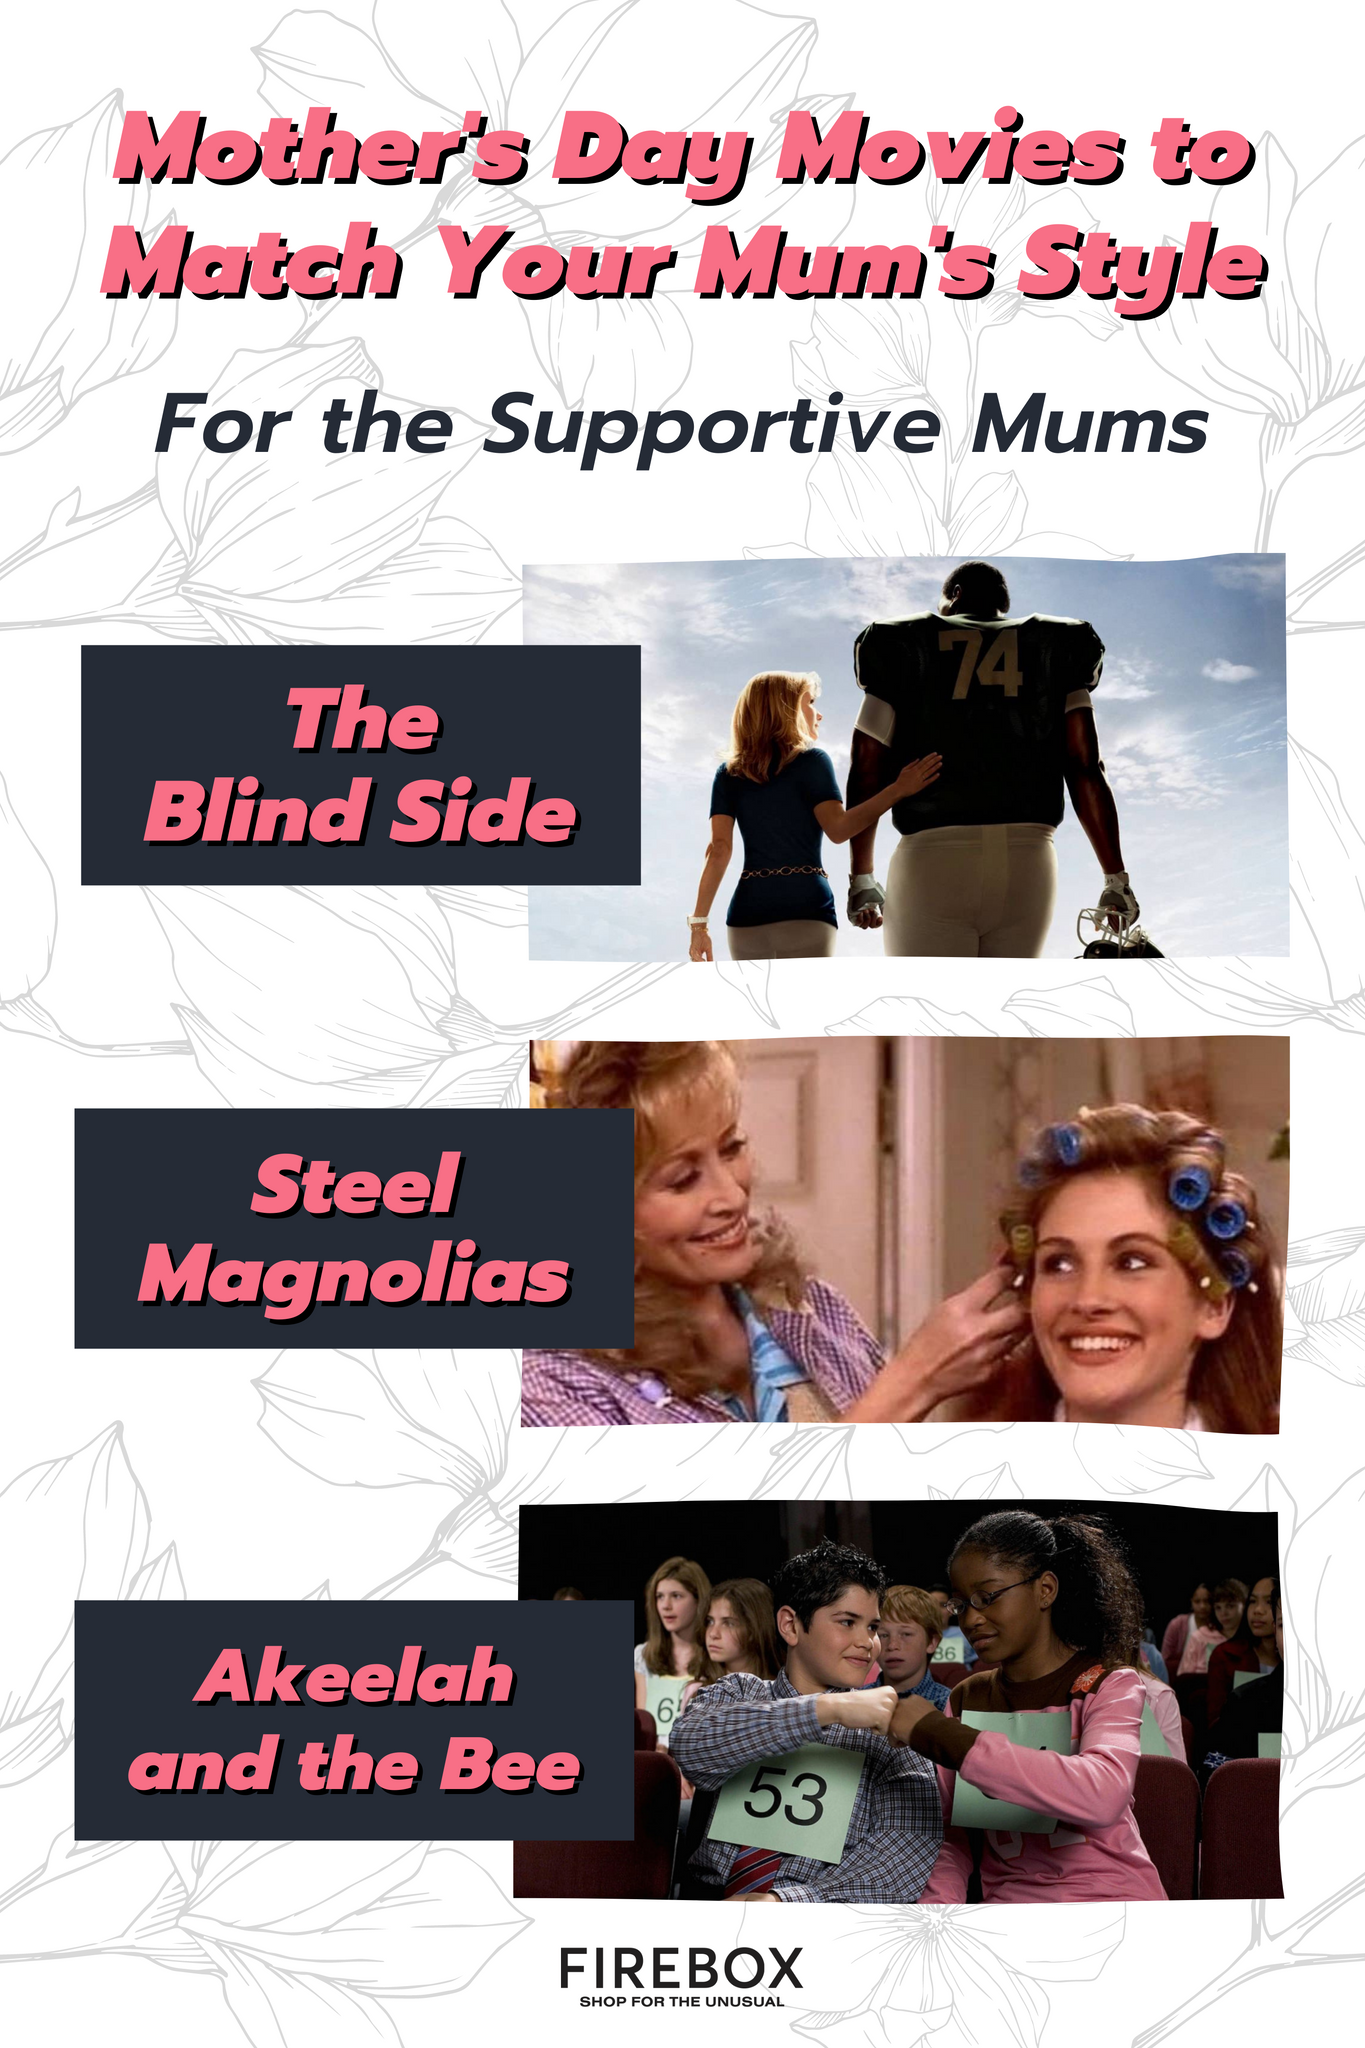 Films about supportive mums